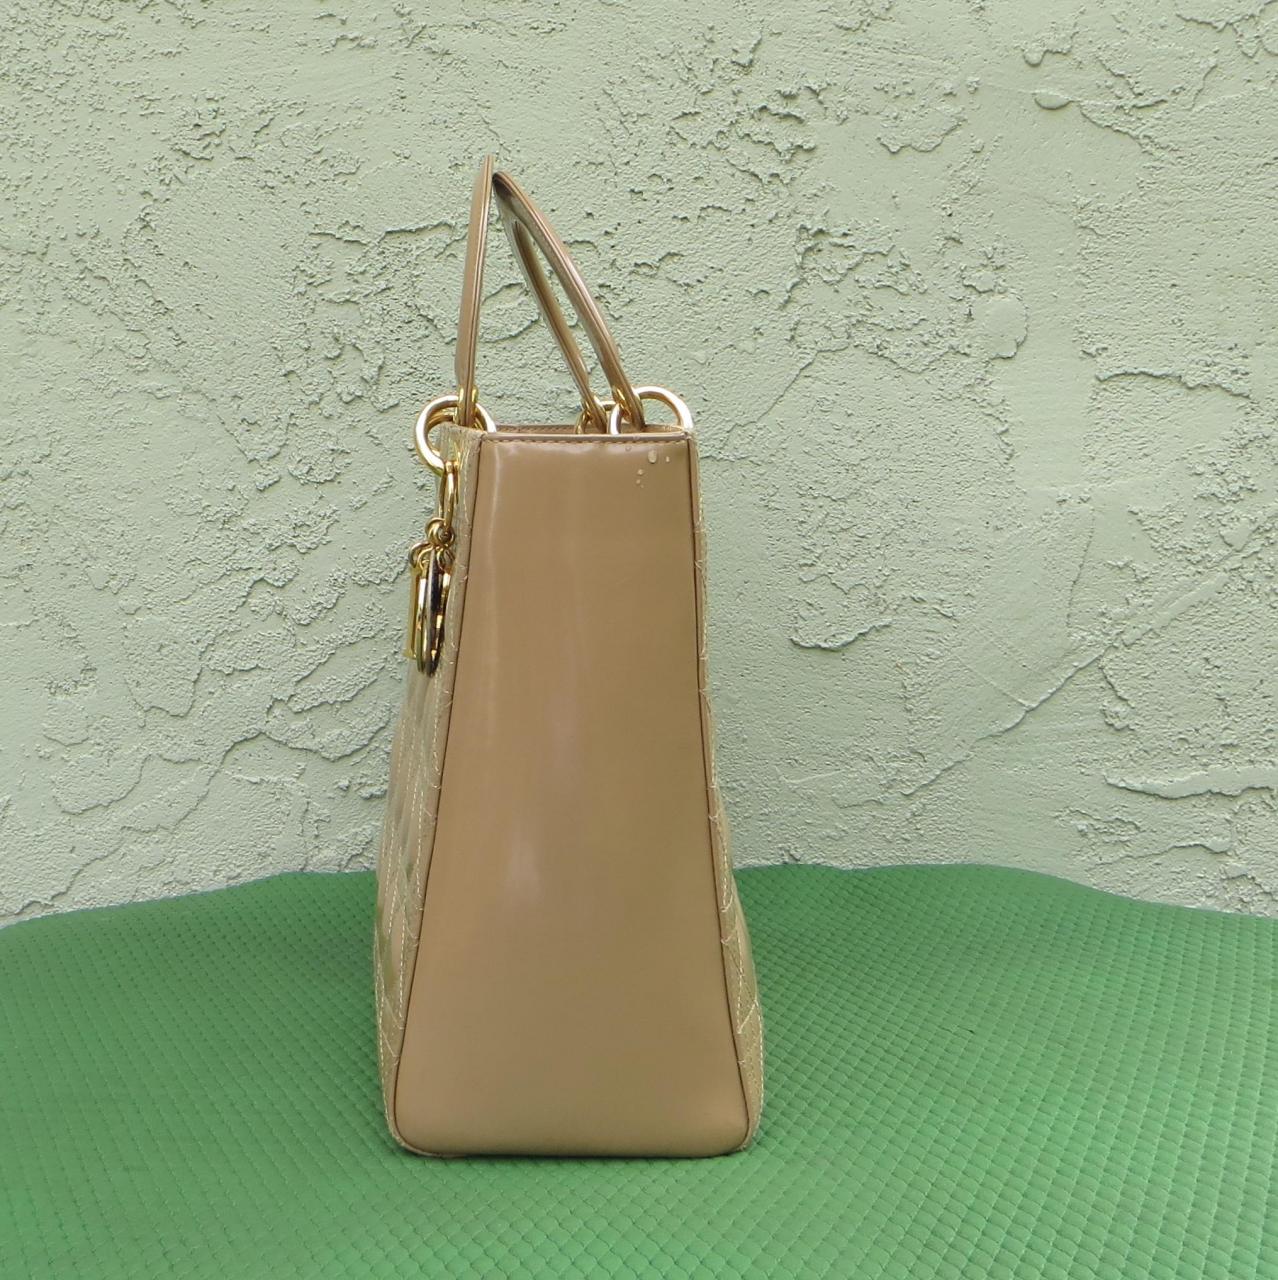 Italy Replica Bags Dior Lady Dior Large Purse Beige Patent Leather Tote - Best Replica Celine ...